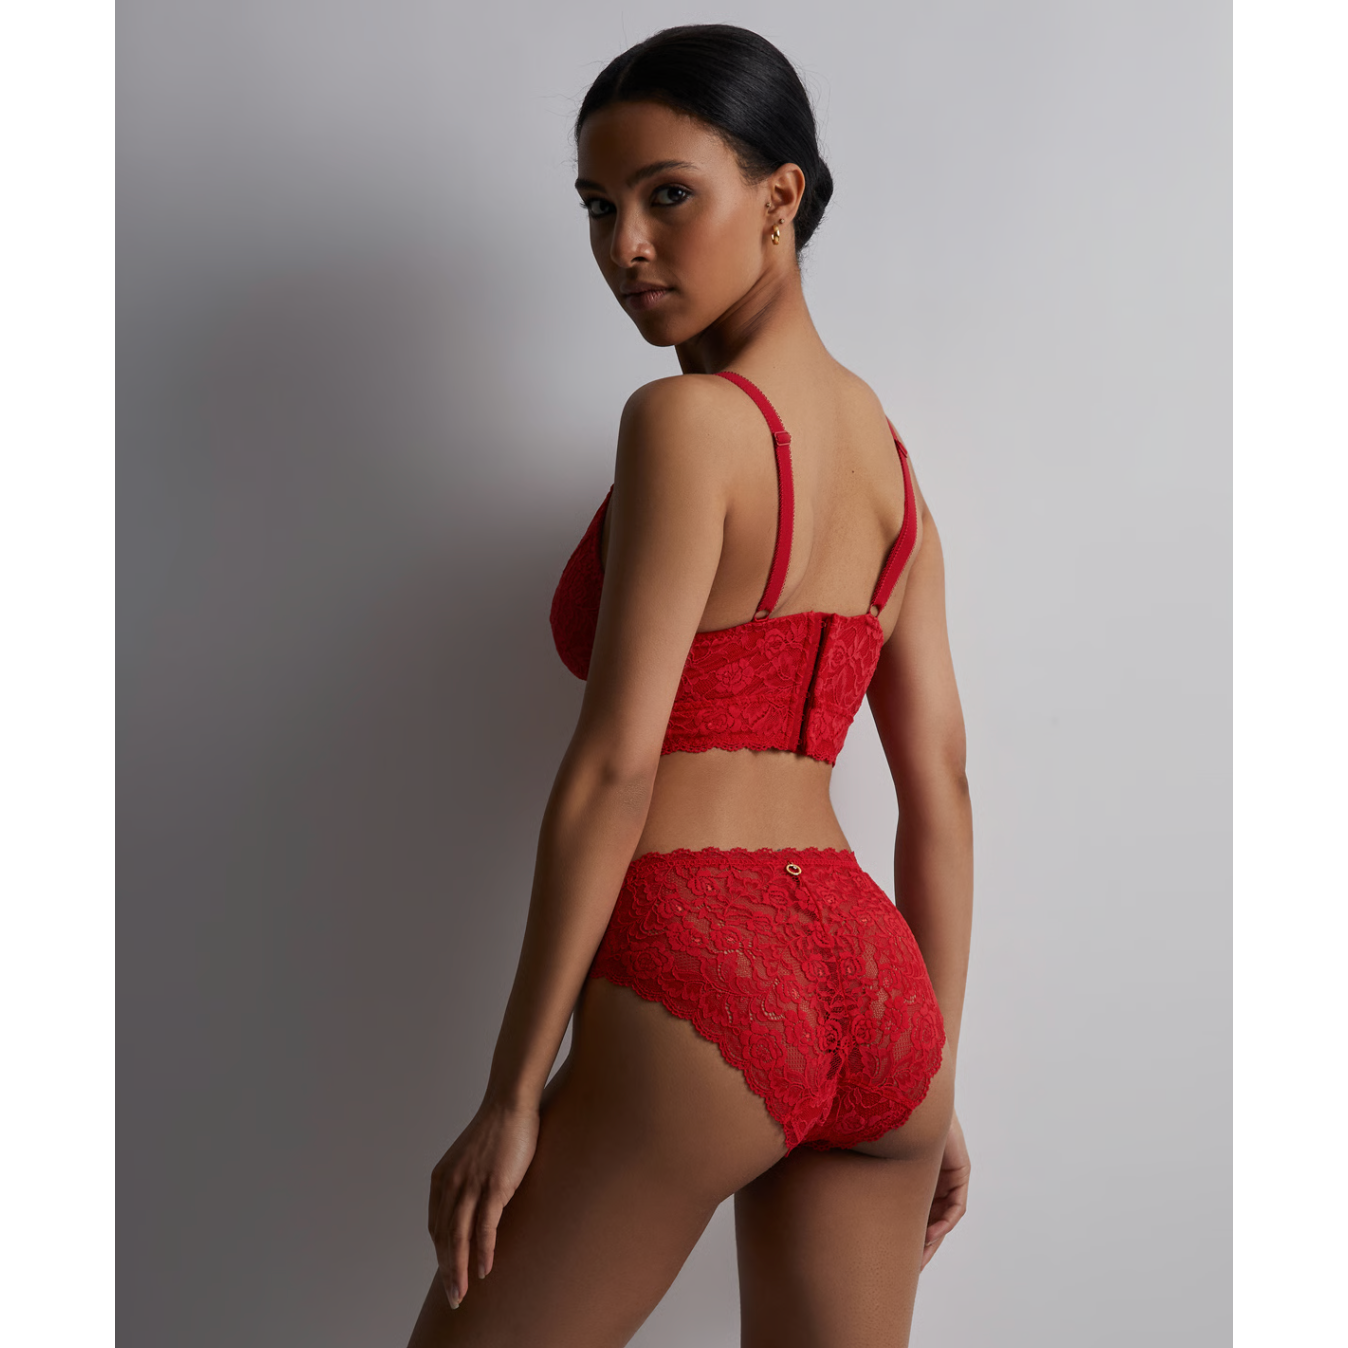 Extremely seductive, it embraces the curves with unrivalled comfort, combined with jacquard lace inspired by the rose d Ispahan. This timeless piece is the ultimate in comfort and seduction.